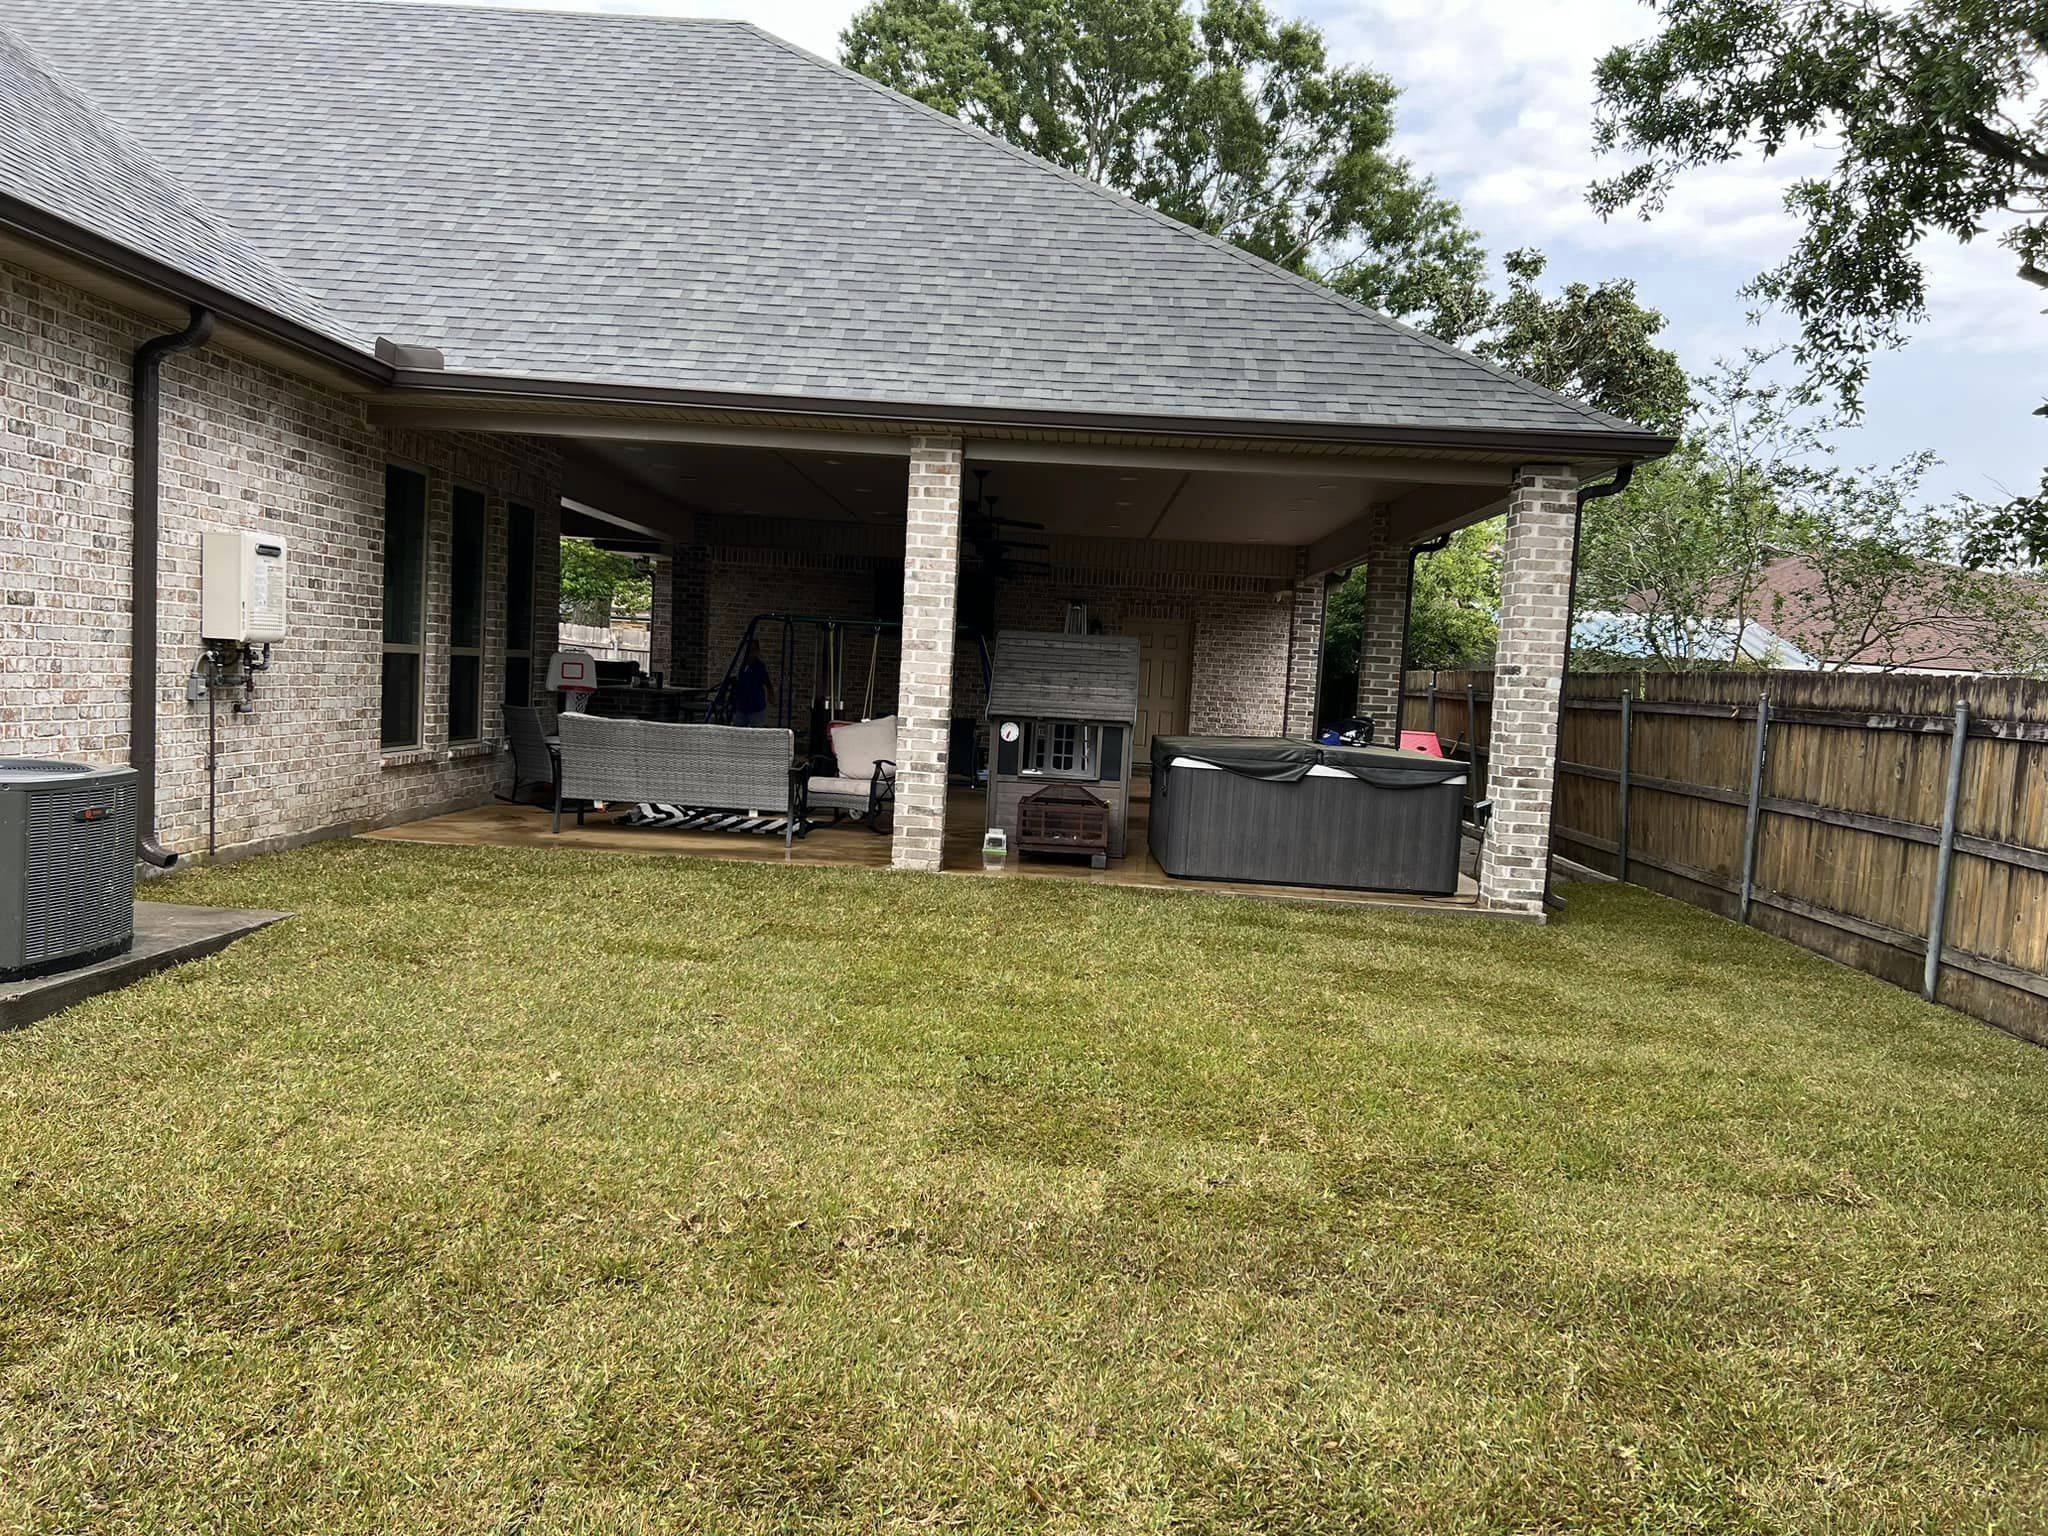 Newly installed sod creating a lush green lawn in a residential backyard with a covered patio and wooden fence, serviced by Southern Grounds, LLC.